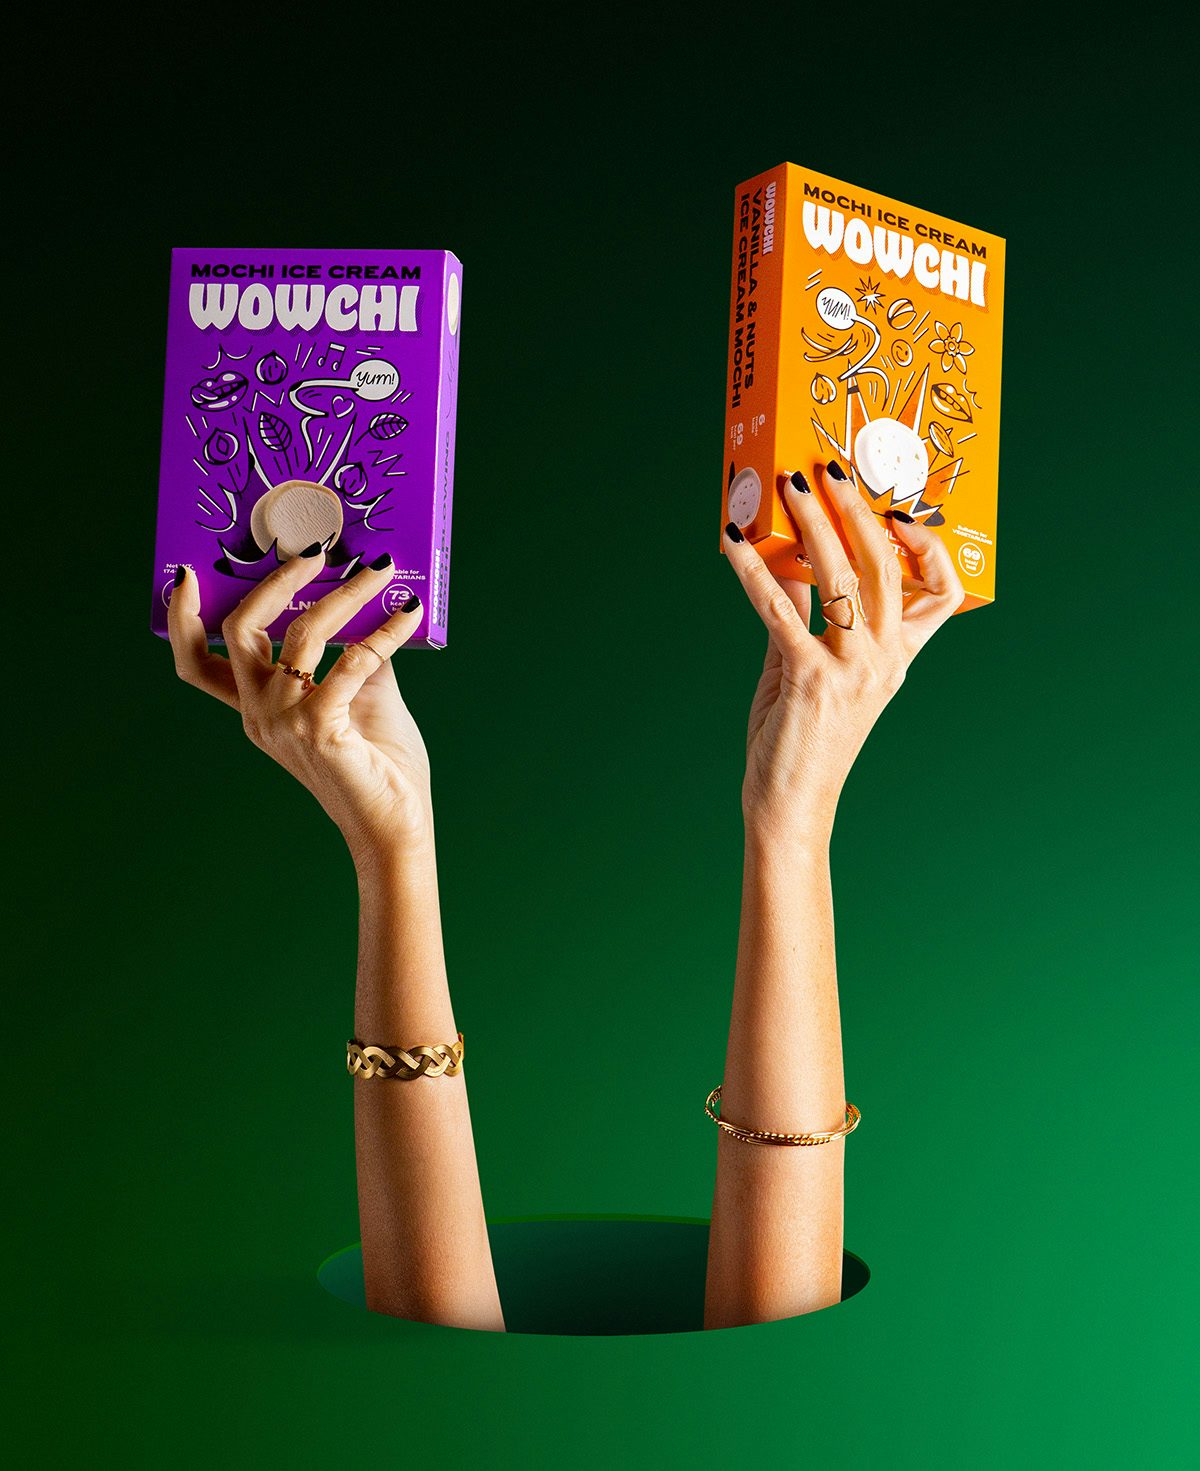 Image shows two hands protruding through a circular hole holding a purple and an orange box of Wowchi mochi in each hand, with line illustrations and mochi balls on the front